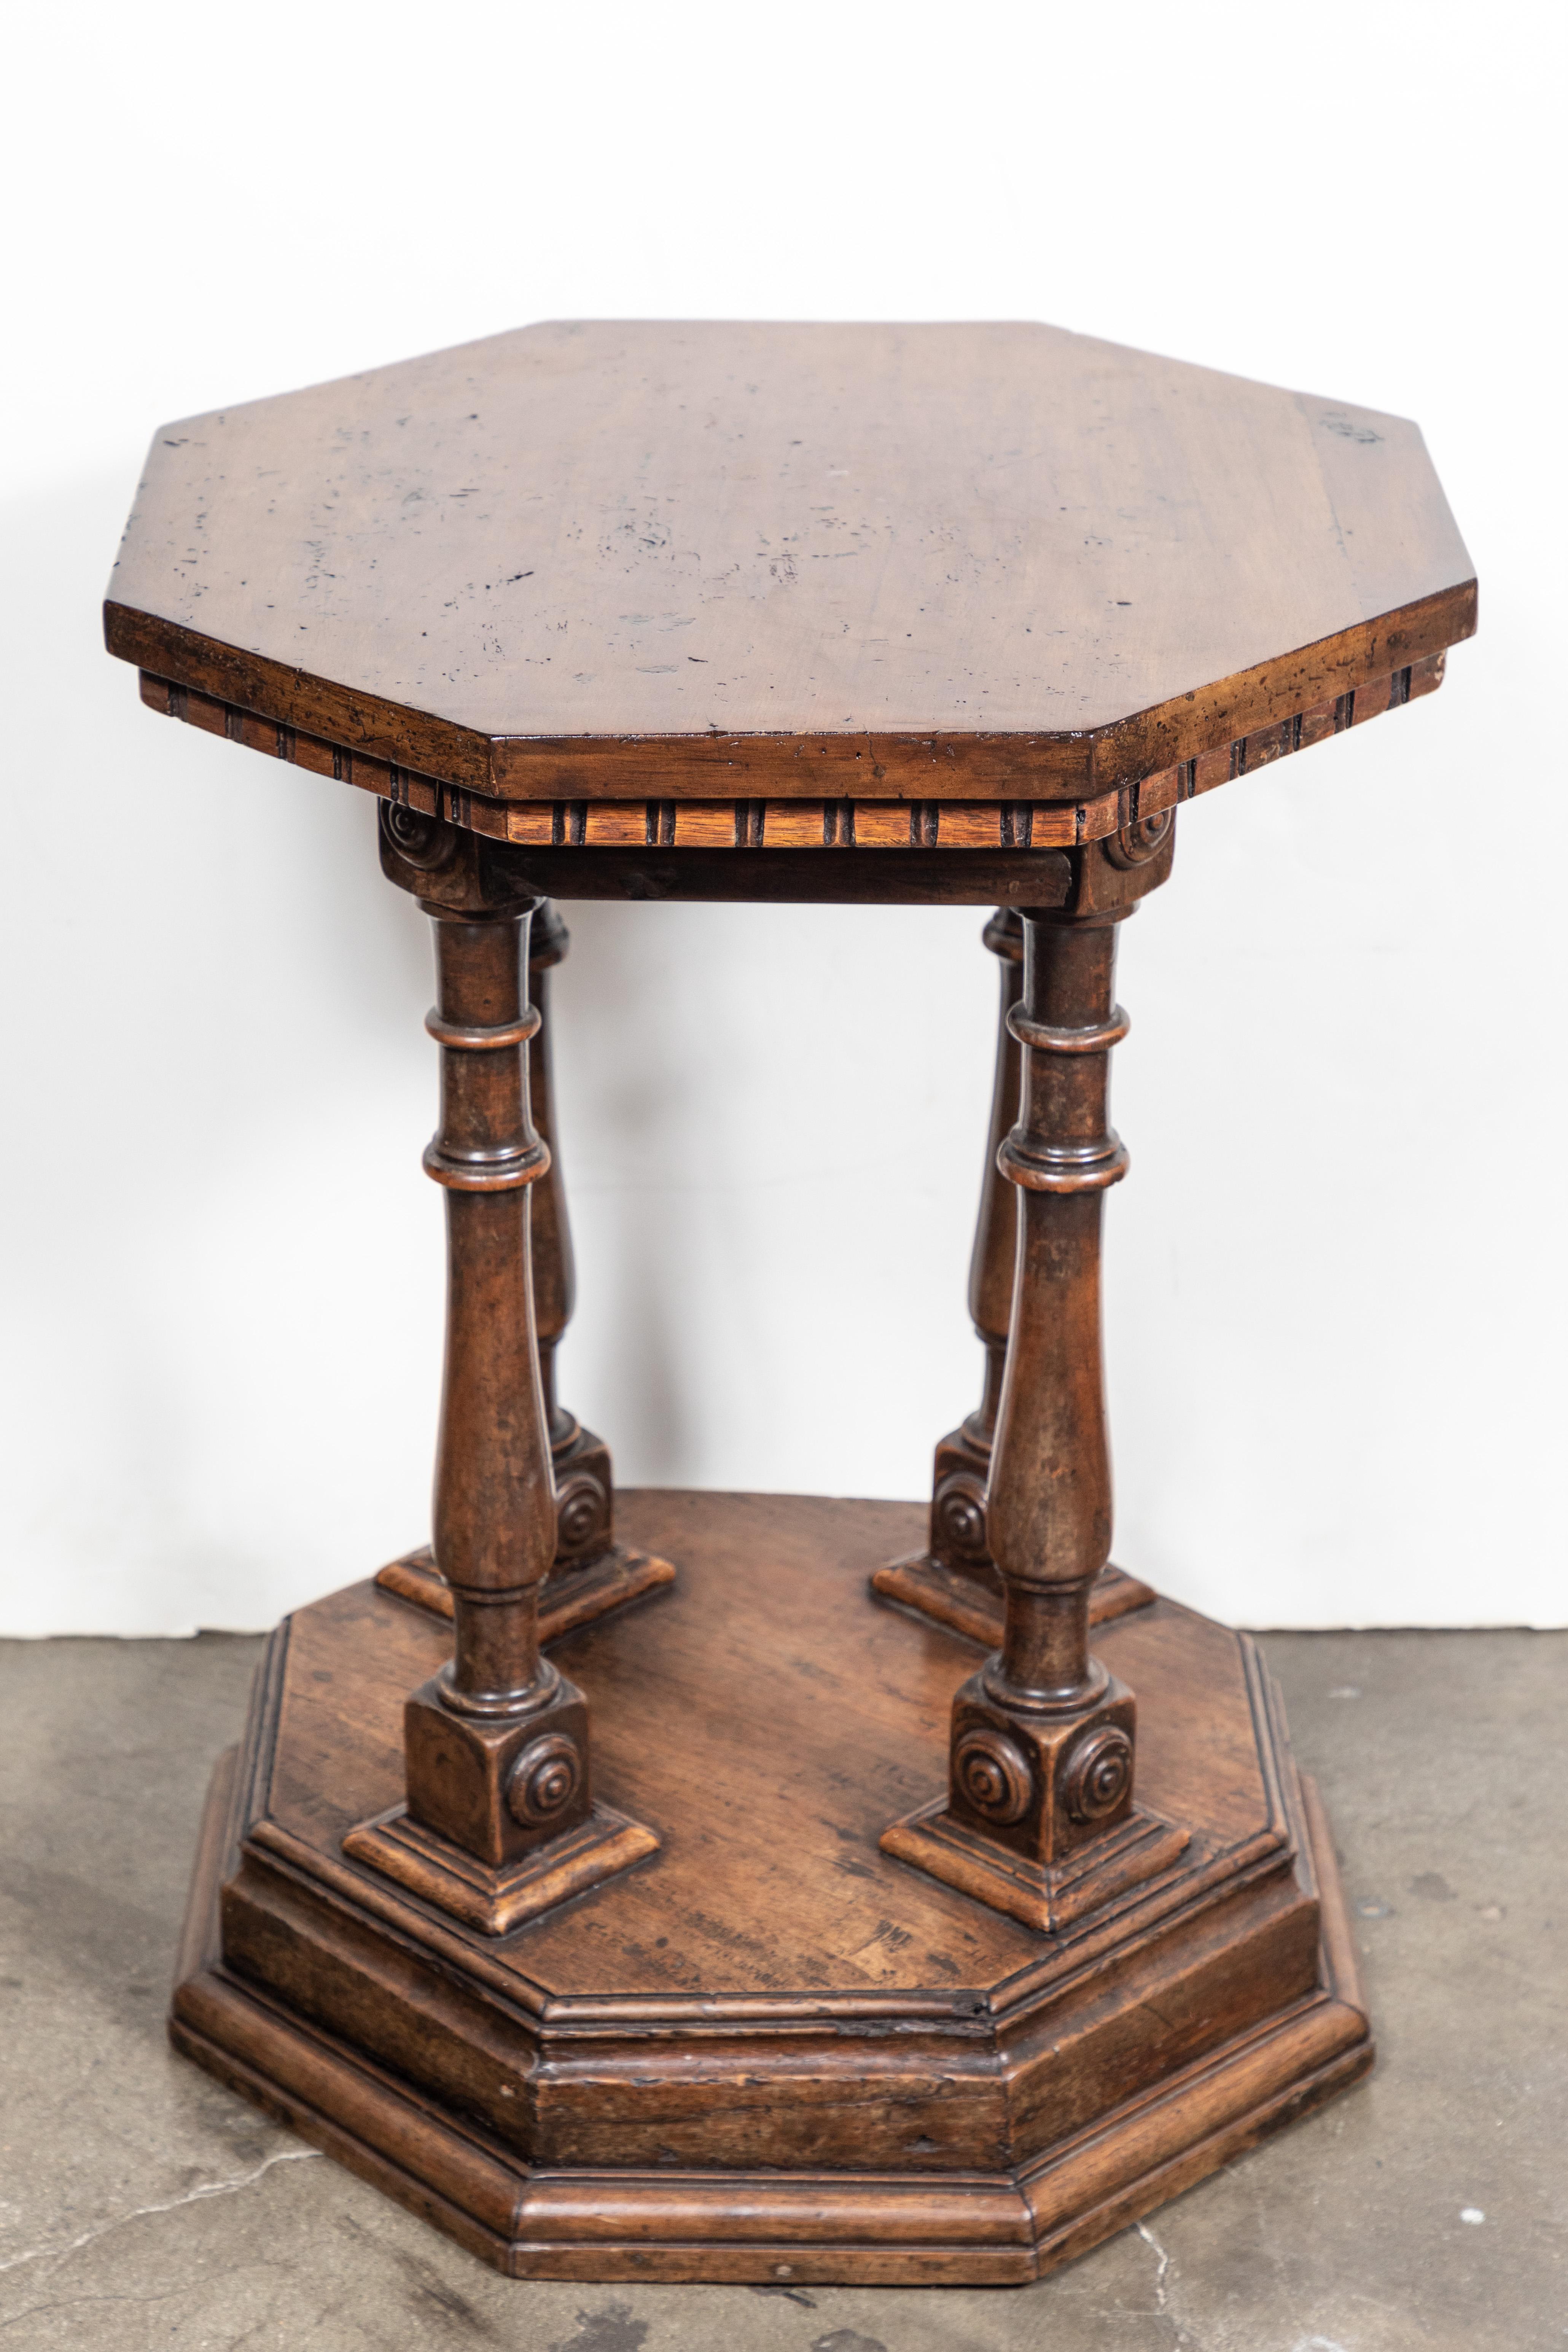 Turn-of-the-century, hand carved, octagonal, Tuscan, walnut side table with turned legs, egg and dart edging, all on a stepped base.